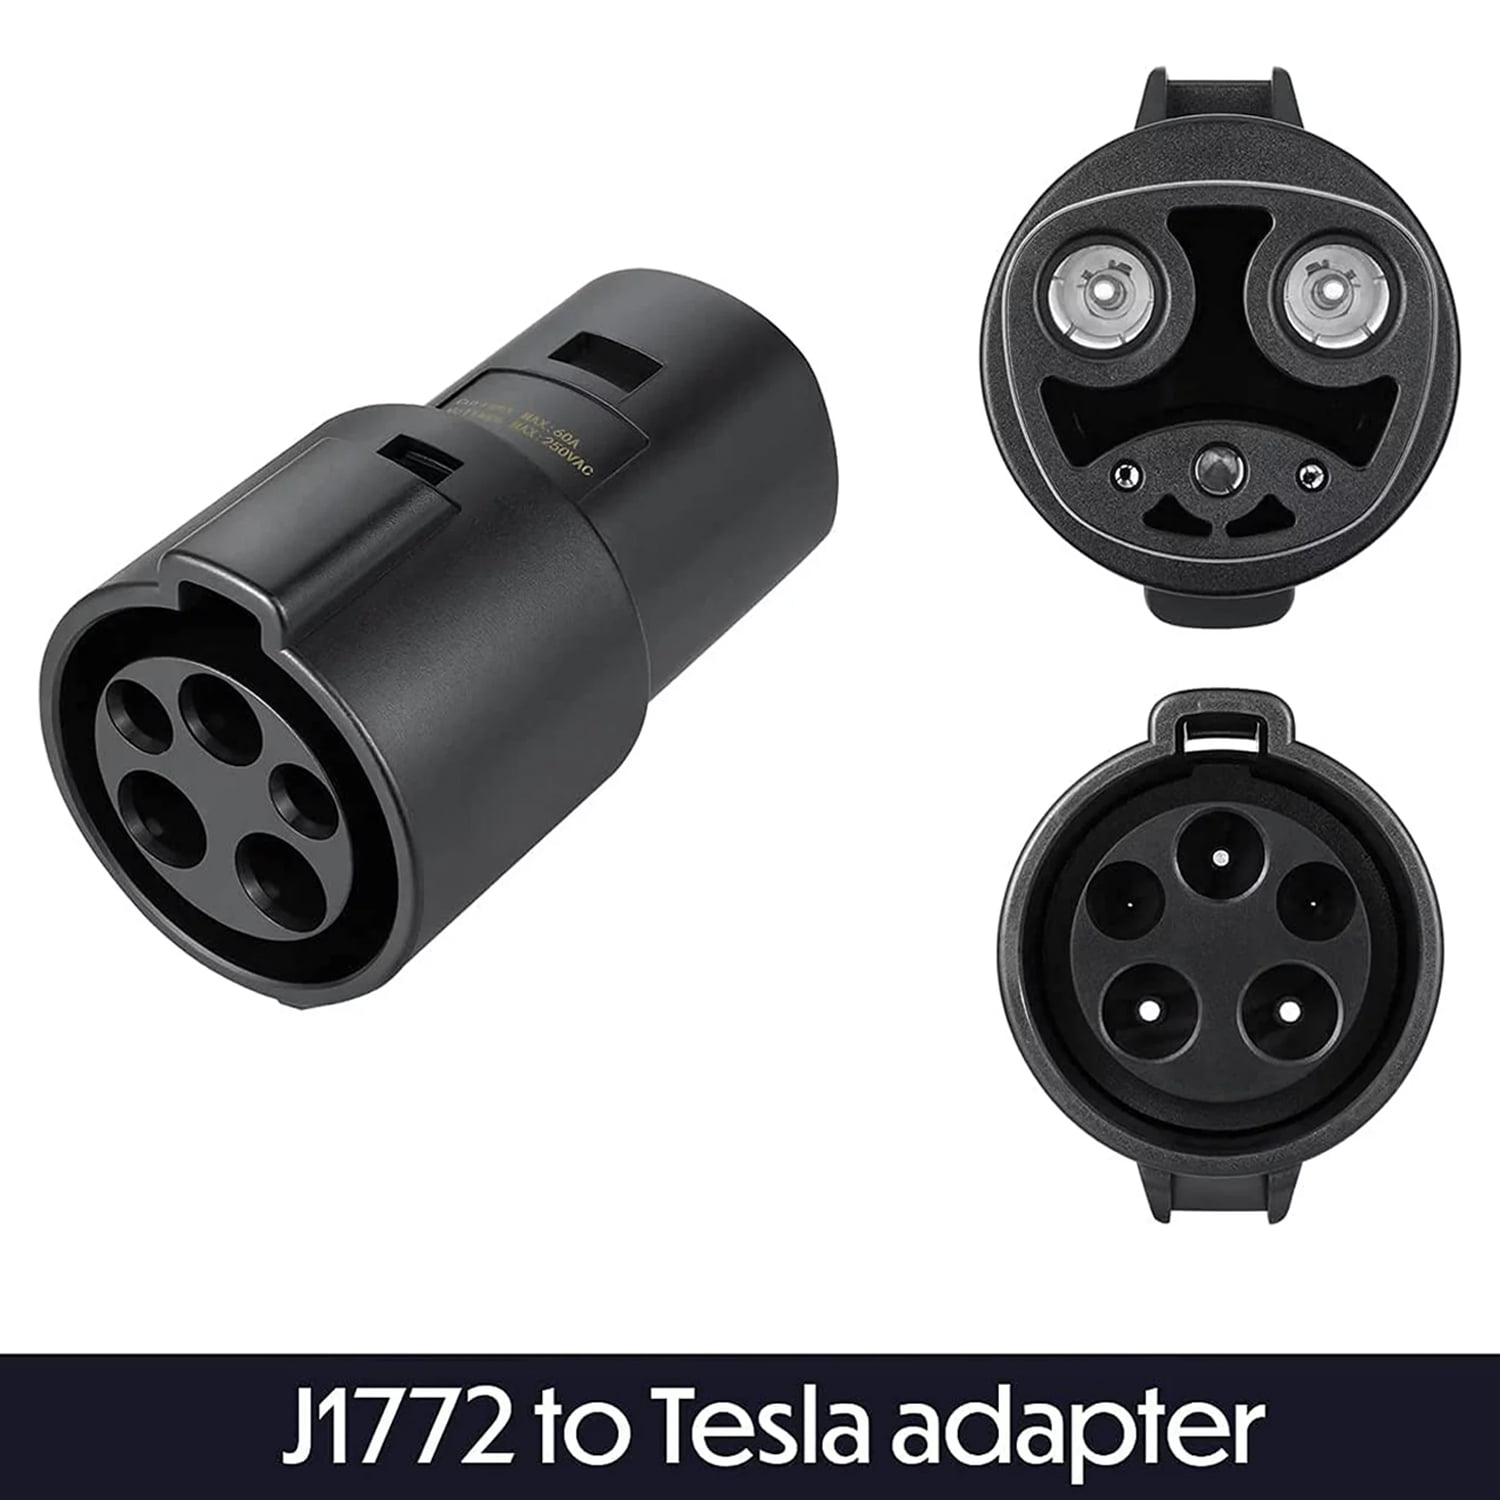 J1772 to Tesla Charging Adapter, Maximize EV Charging Options Compatible  with Tesla Model 3, Y, S, x for Level 1 Level 2 Charging Stations SAE J1772  Charger, Black 